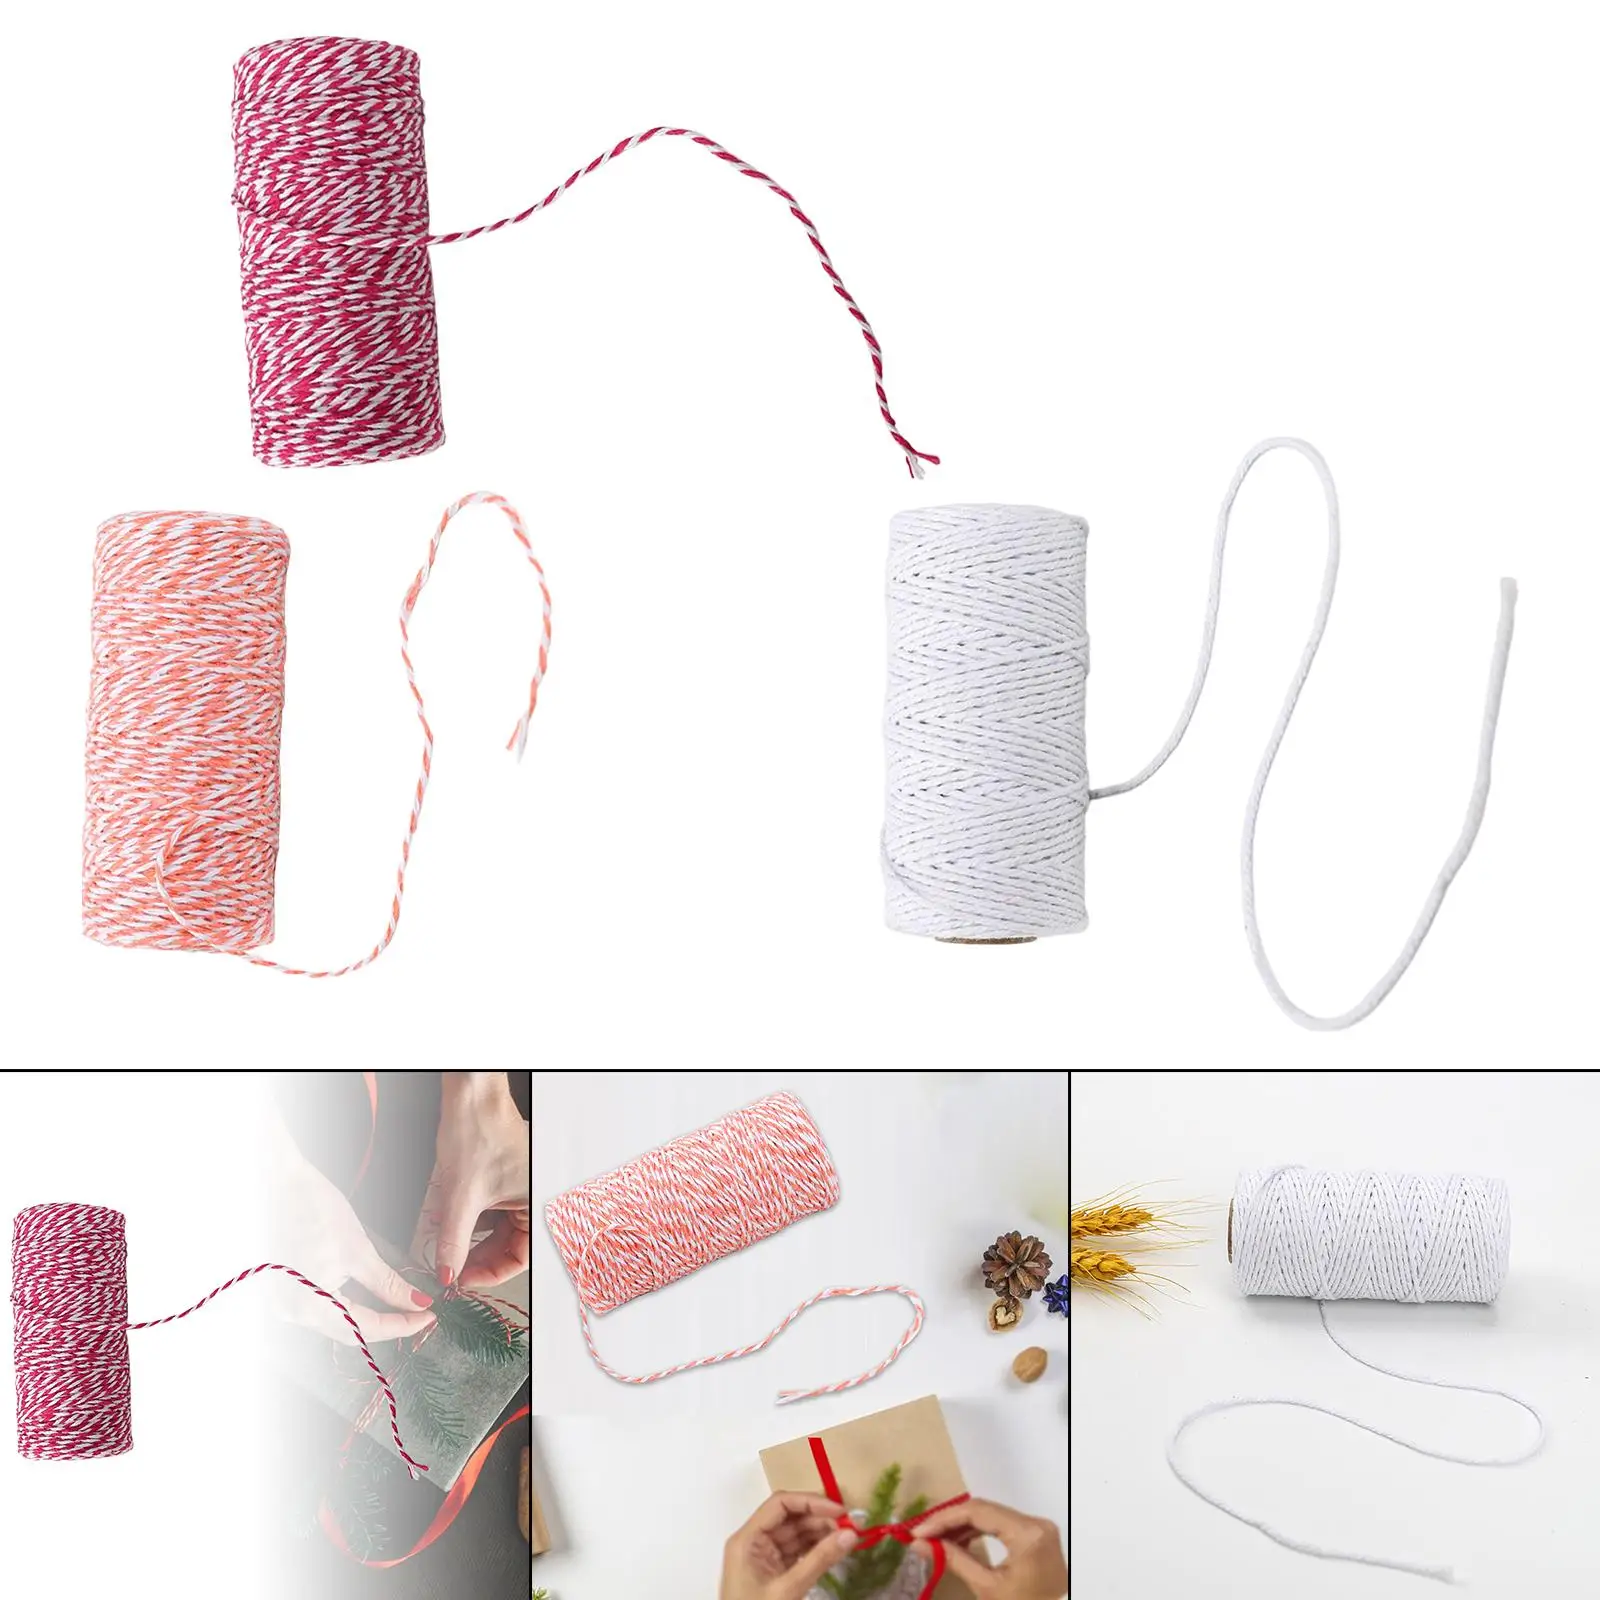 2mm Macrame Cord Rope Festive Twine Packing String for Embellishments Home Sewing Party Gift Wrapping